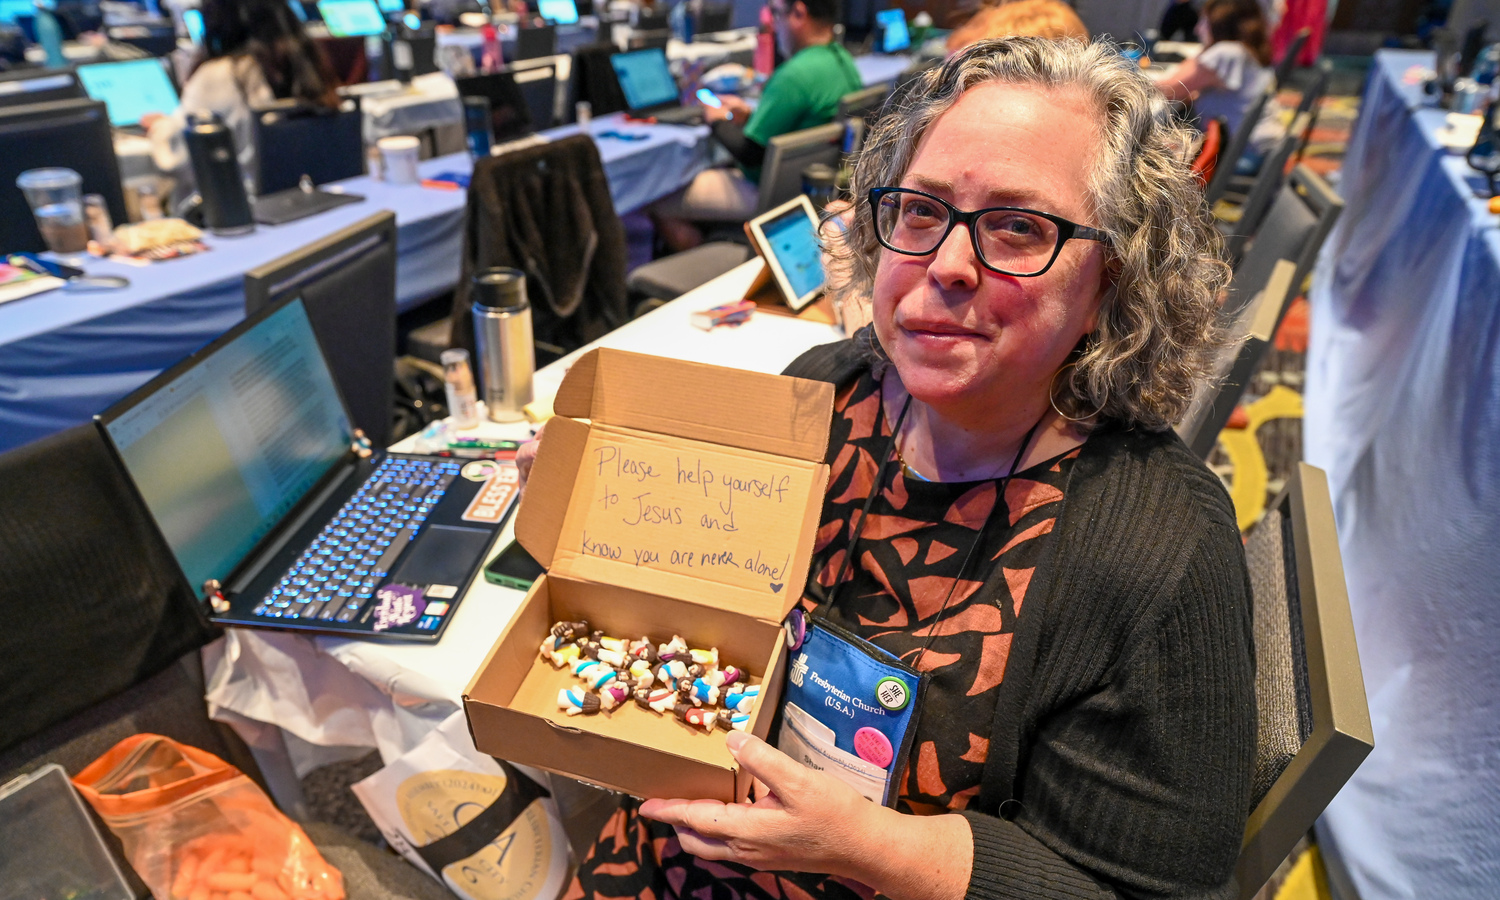 Sharyl Dixon of Coastlands Presbytery has been sharing Little Jesus figures with fellow participants in GA226 and hiding them around the GA site.